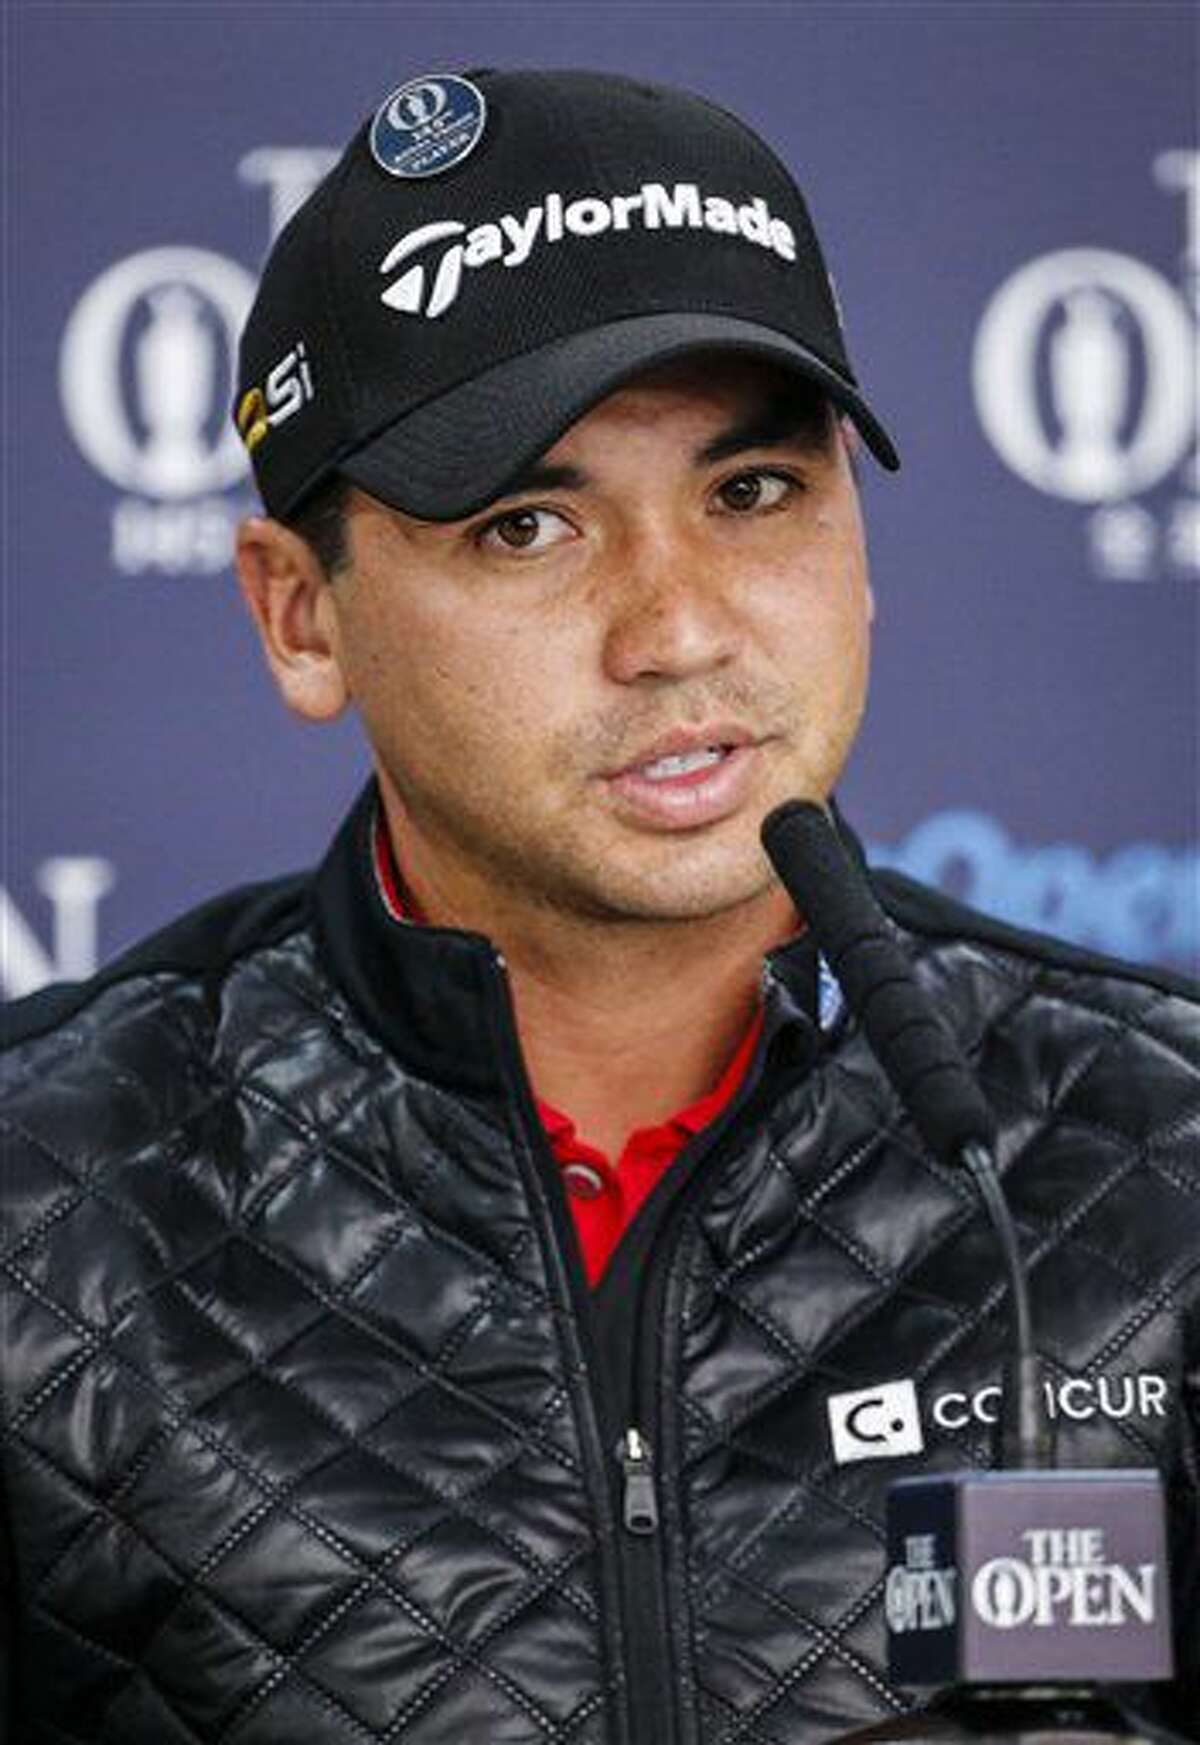 Australia's Jason Day attends a press conference at the Royal Troon Golf Club in Troon, Scotland, Monday July 11, 2016. (Danny Lawson/PA via AP)